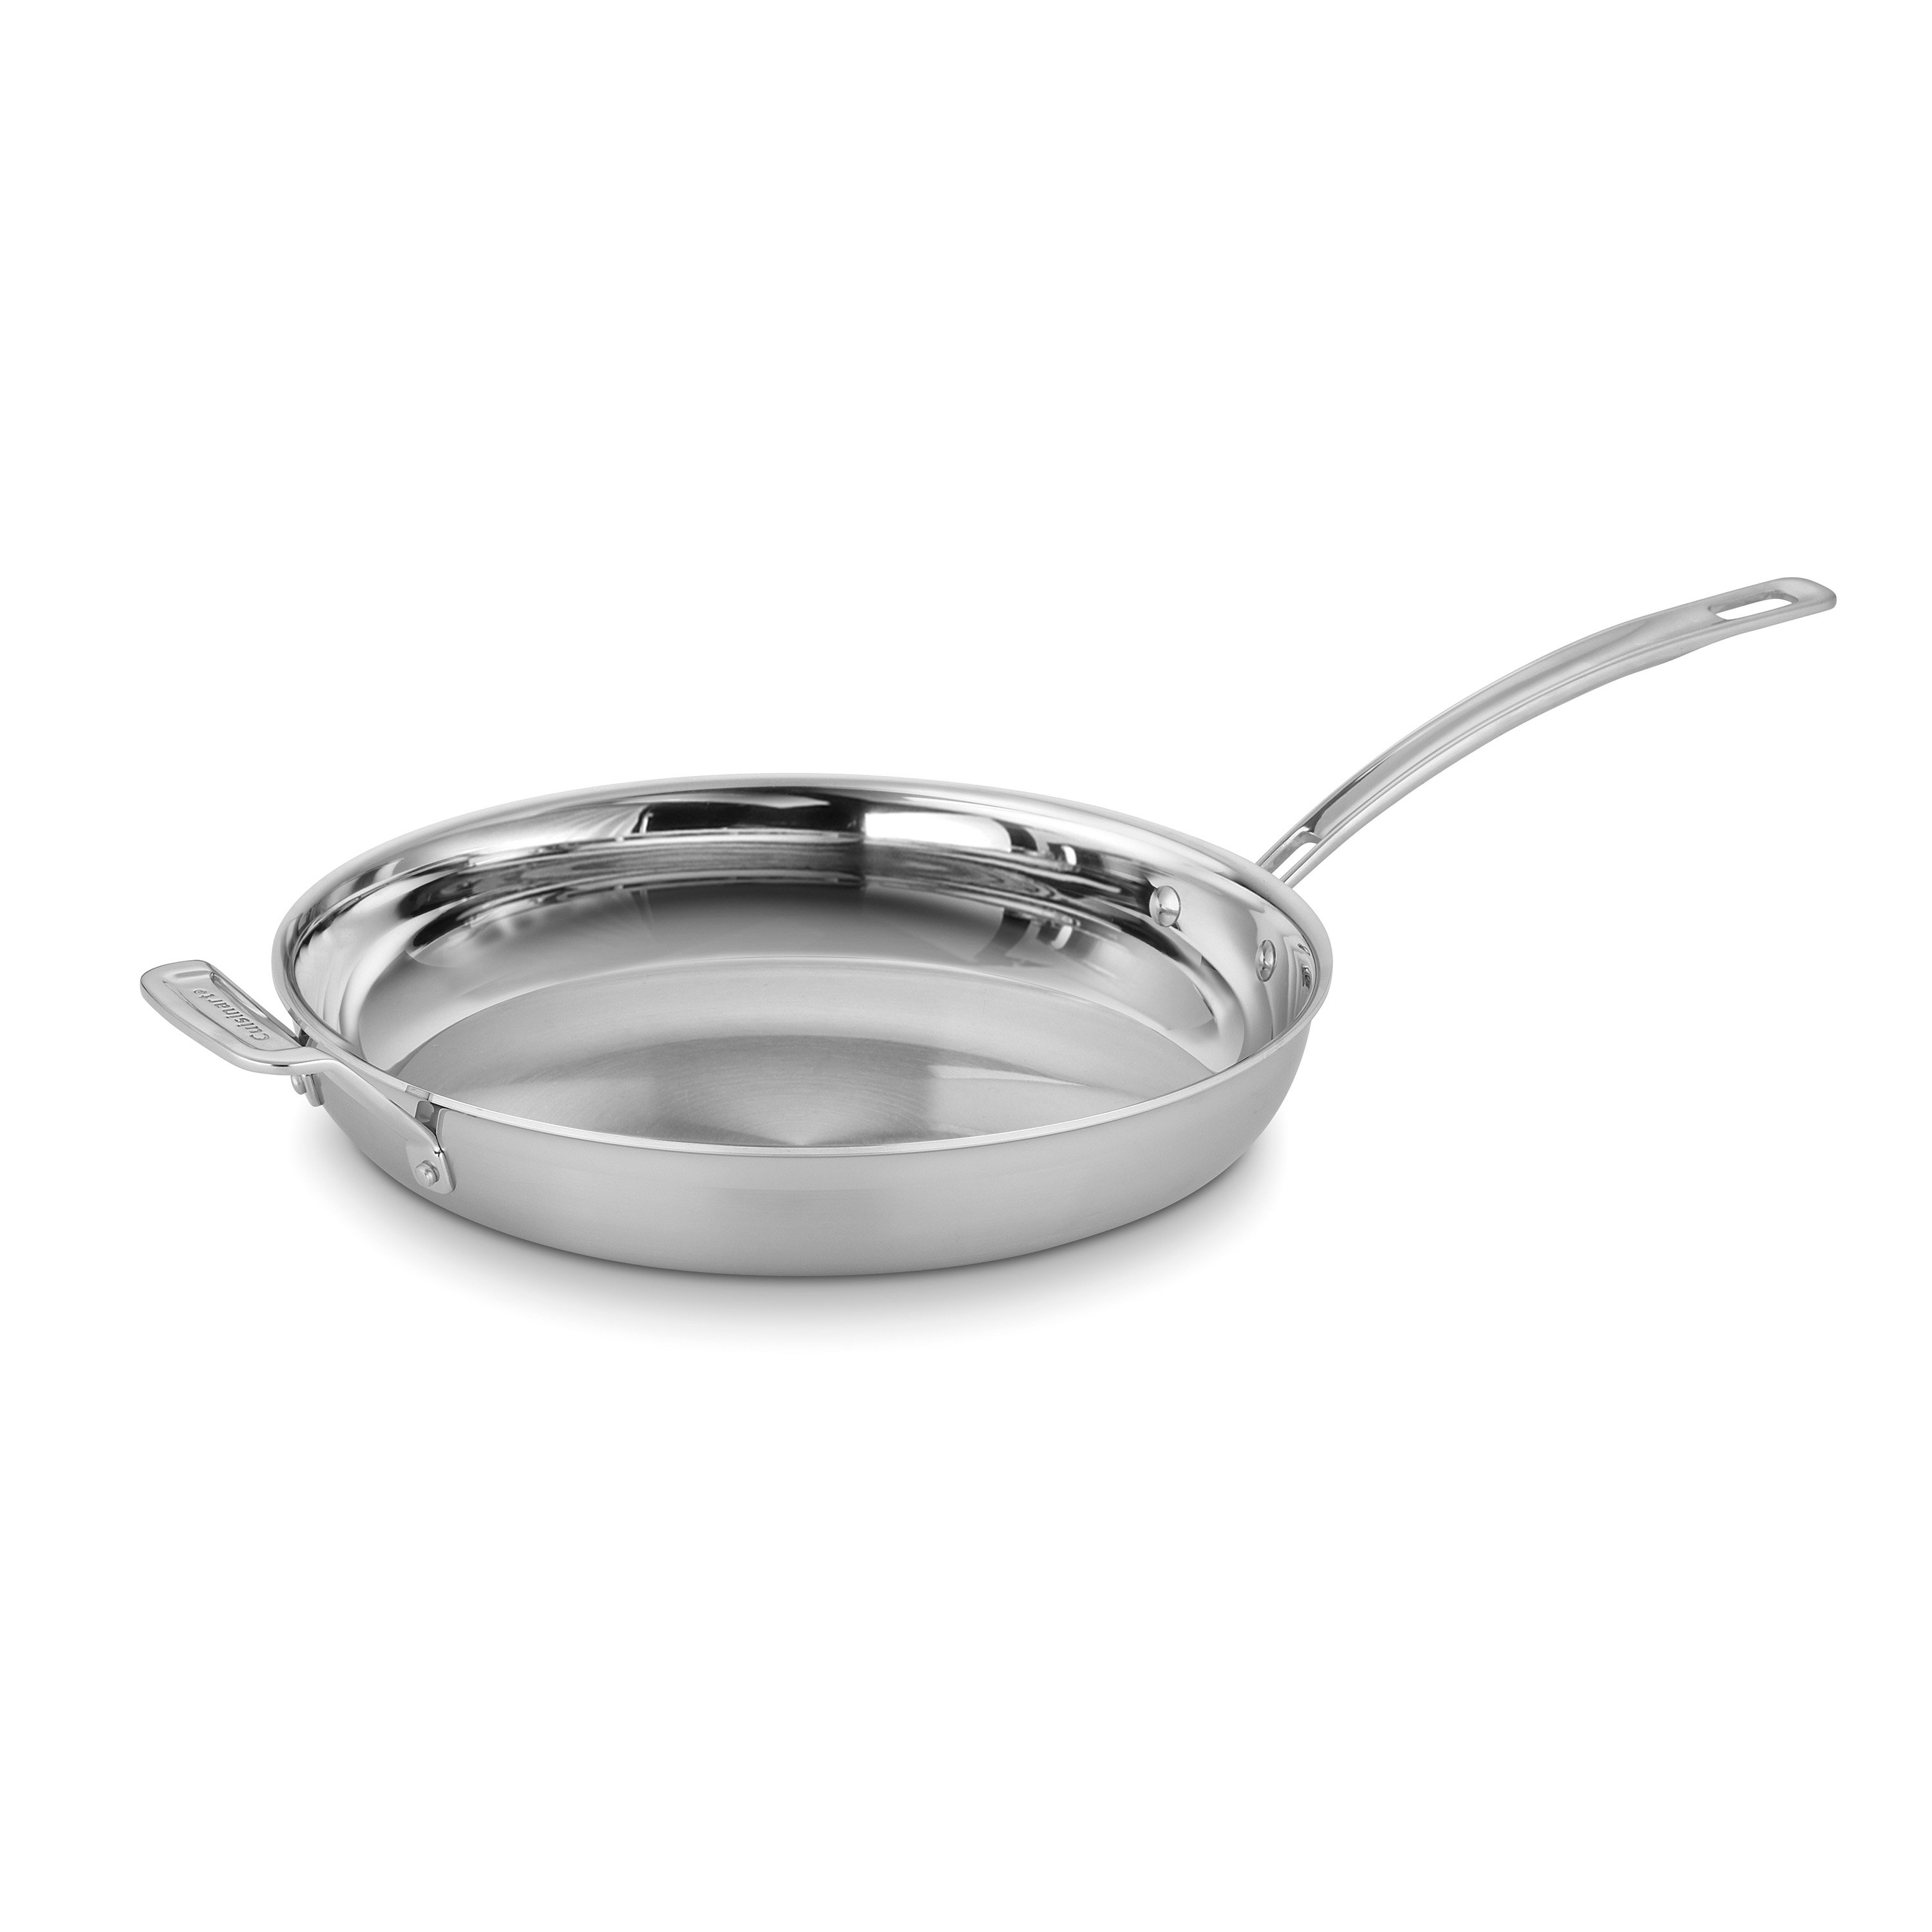 MultiClad Pro Triple Ply Stainless Cookware 12'' Skillet with Helper Handle